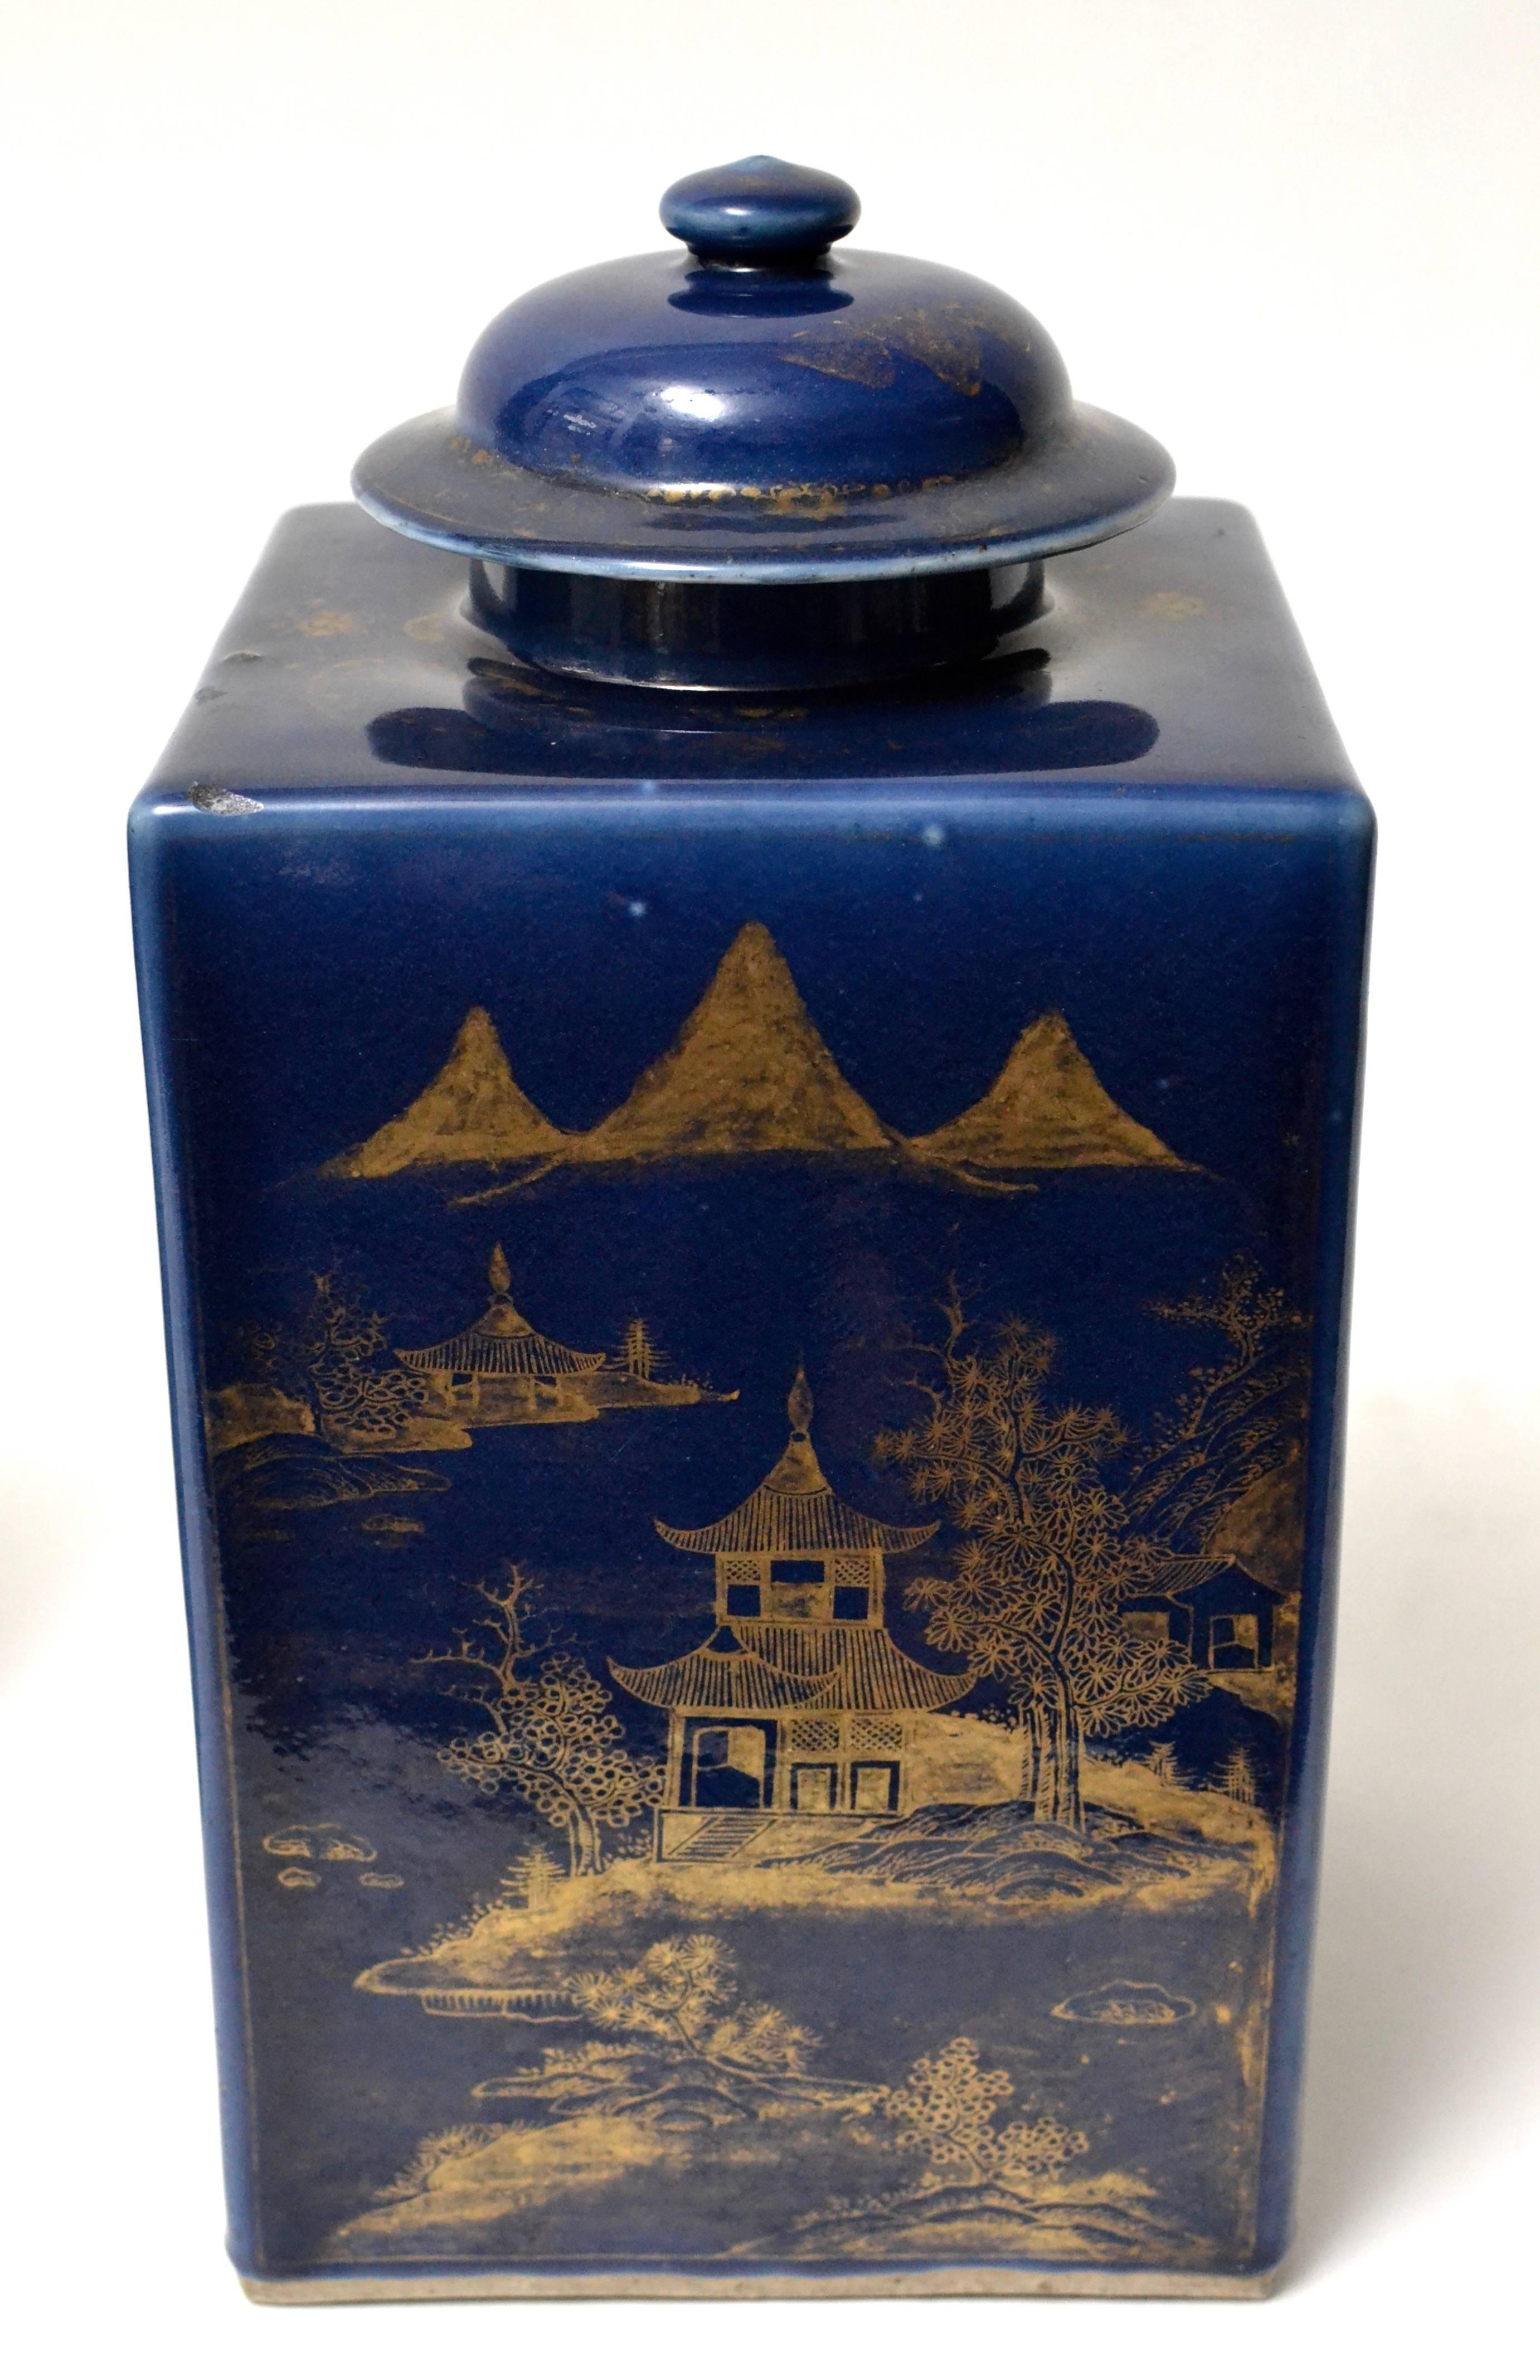 Late 18th Century Pair of Powder Blue Chinese Tea Caddy Urns with Lids, circa 1800